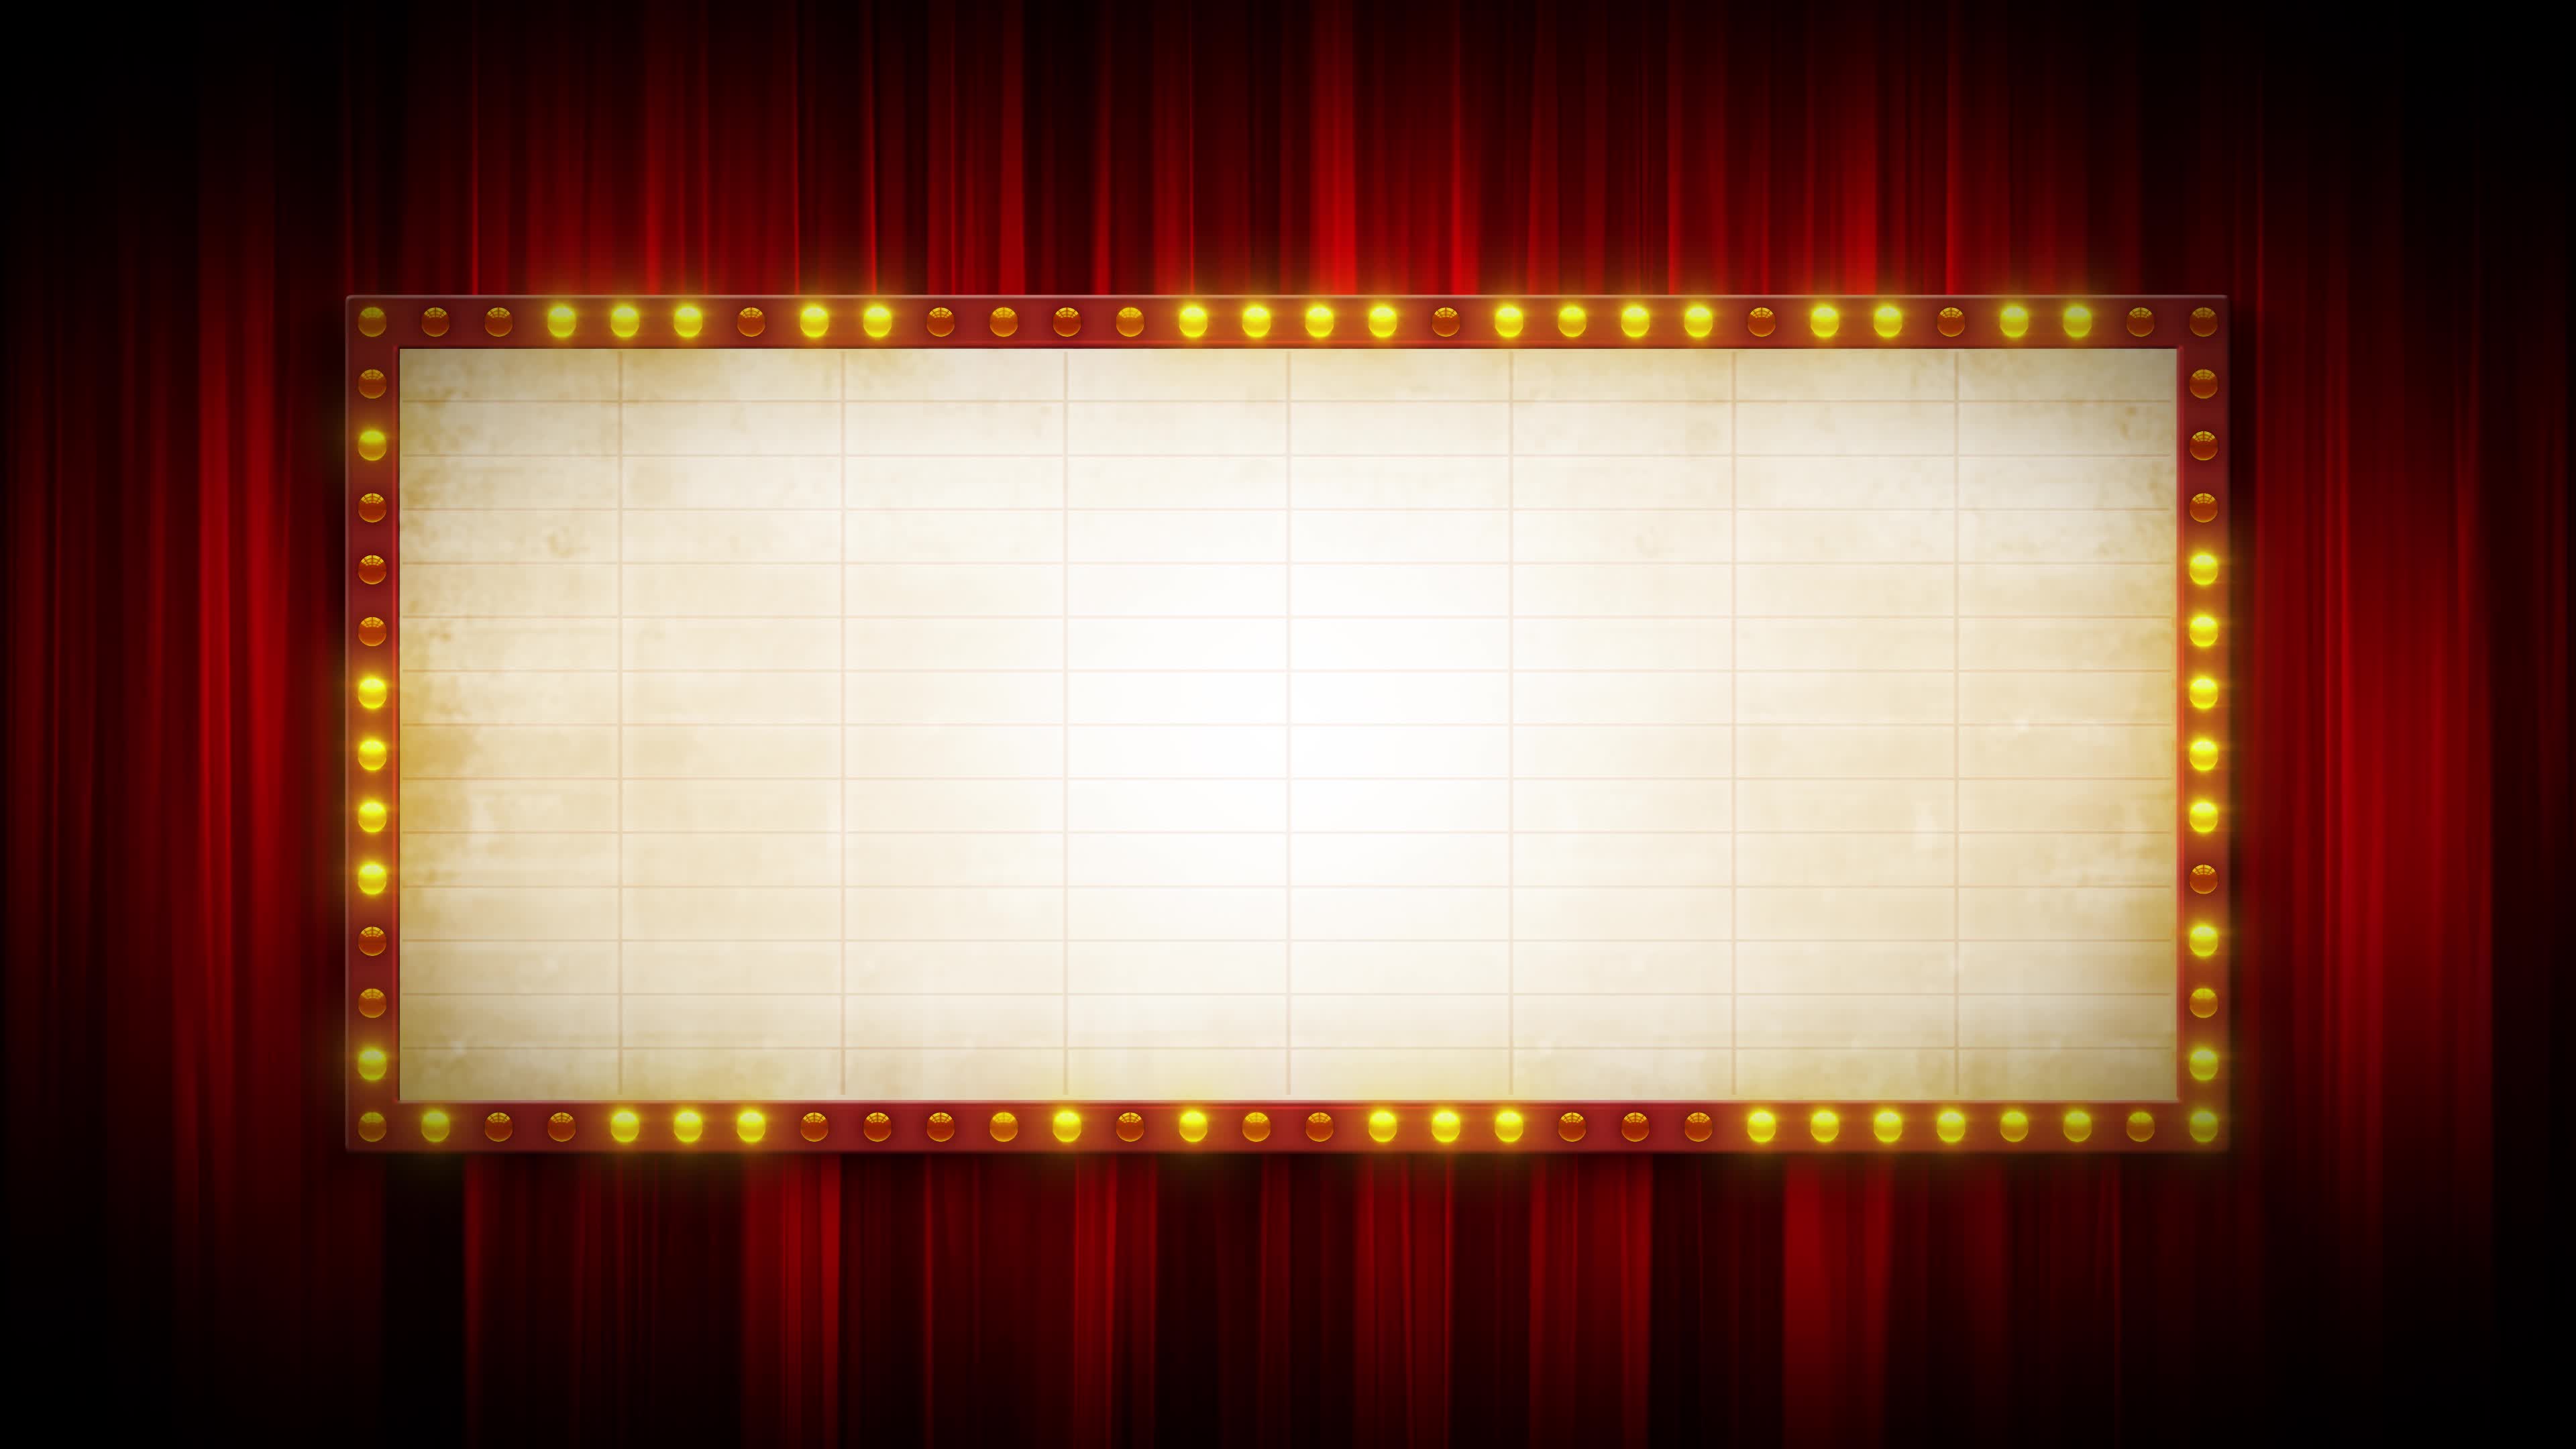 Broadway Cinema Background With Marquee Sign For Text And Red